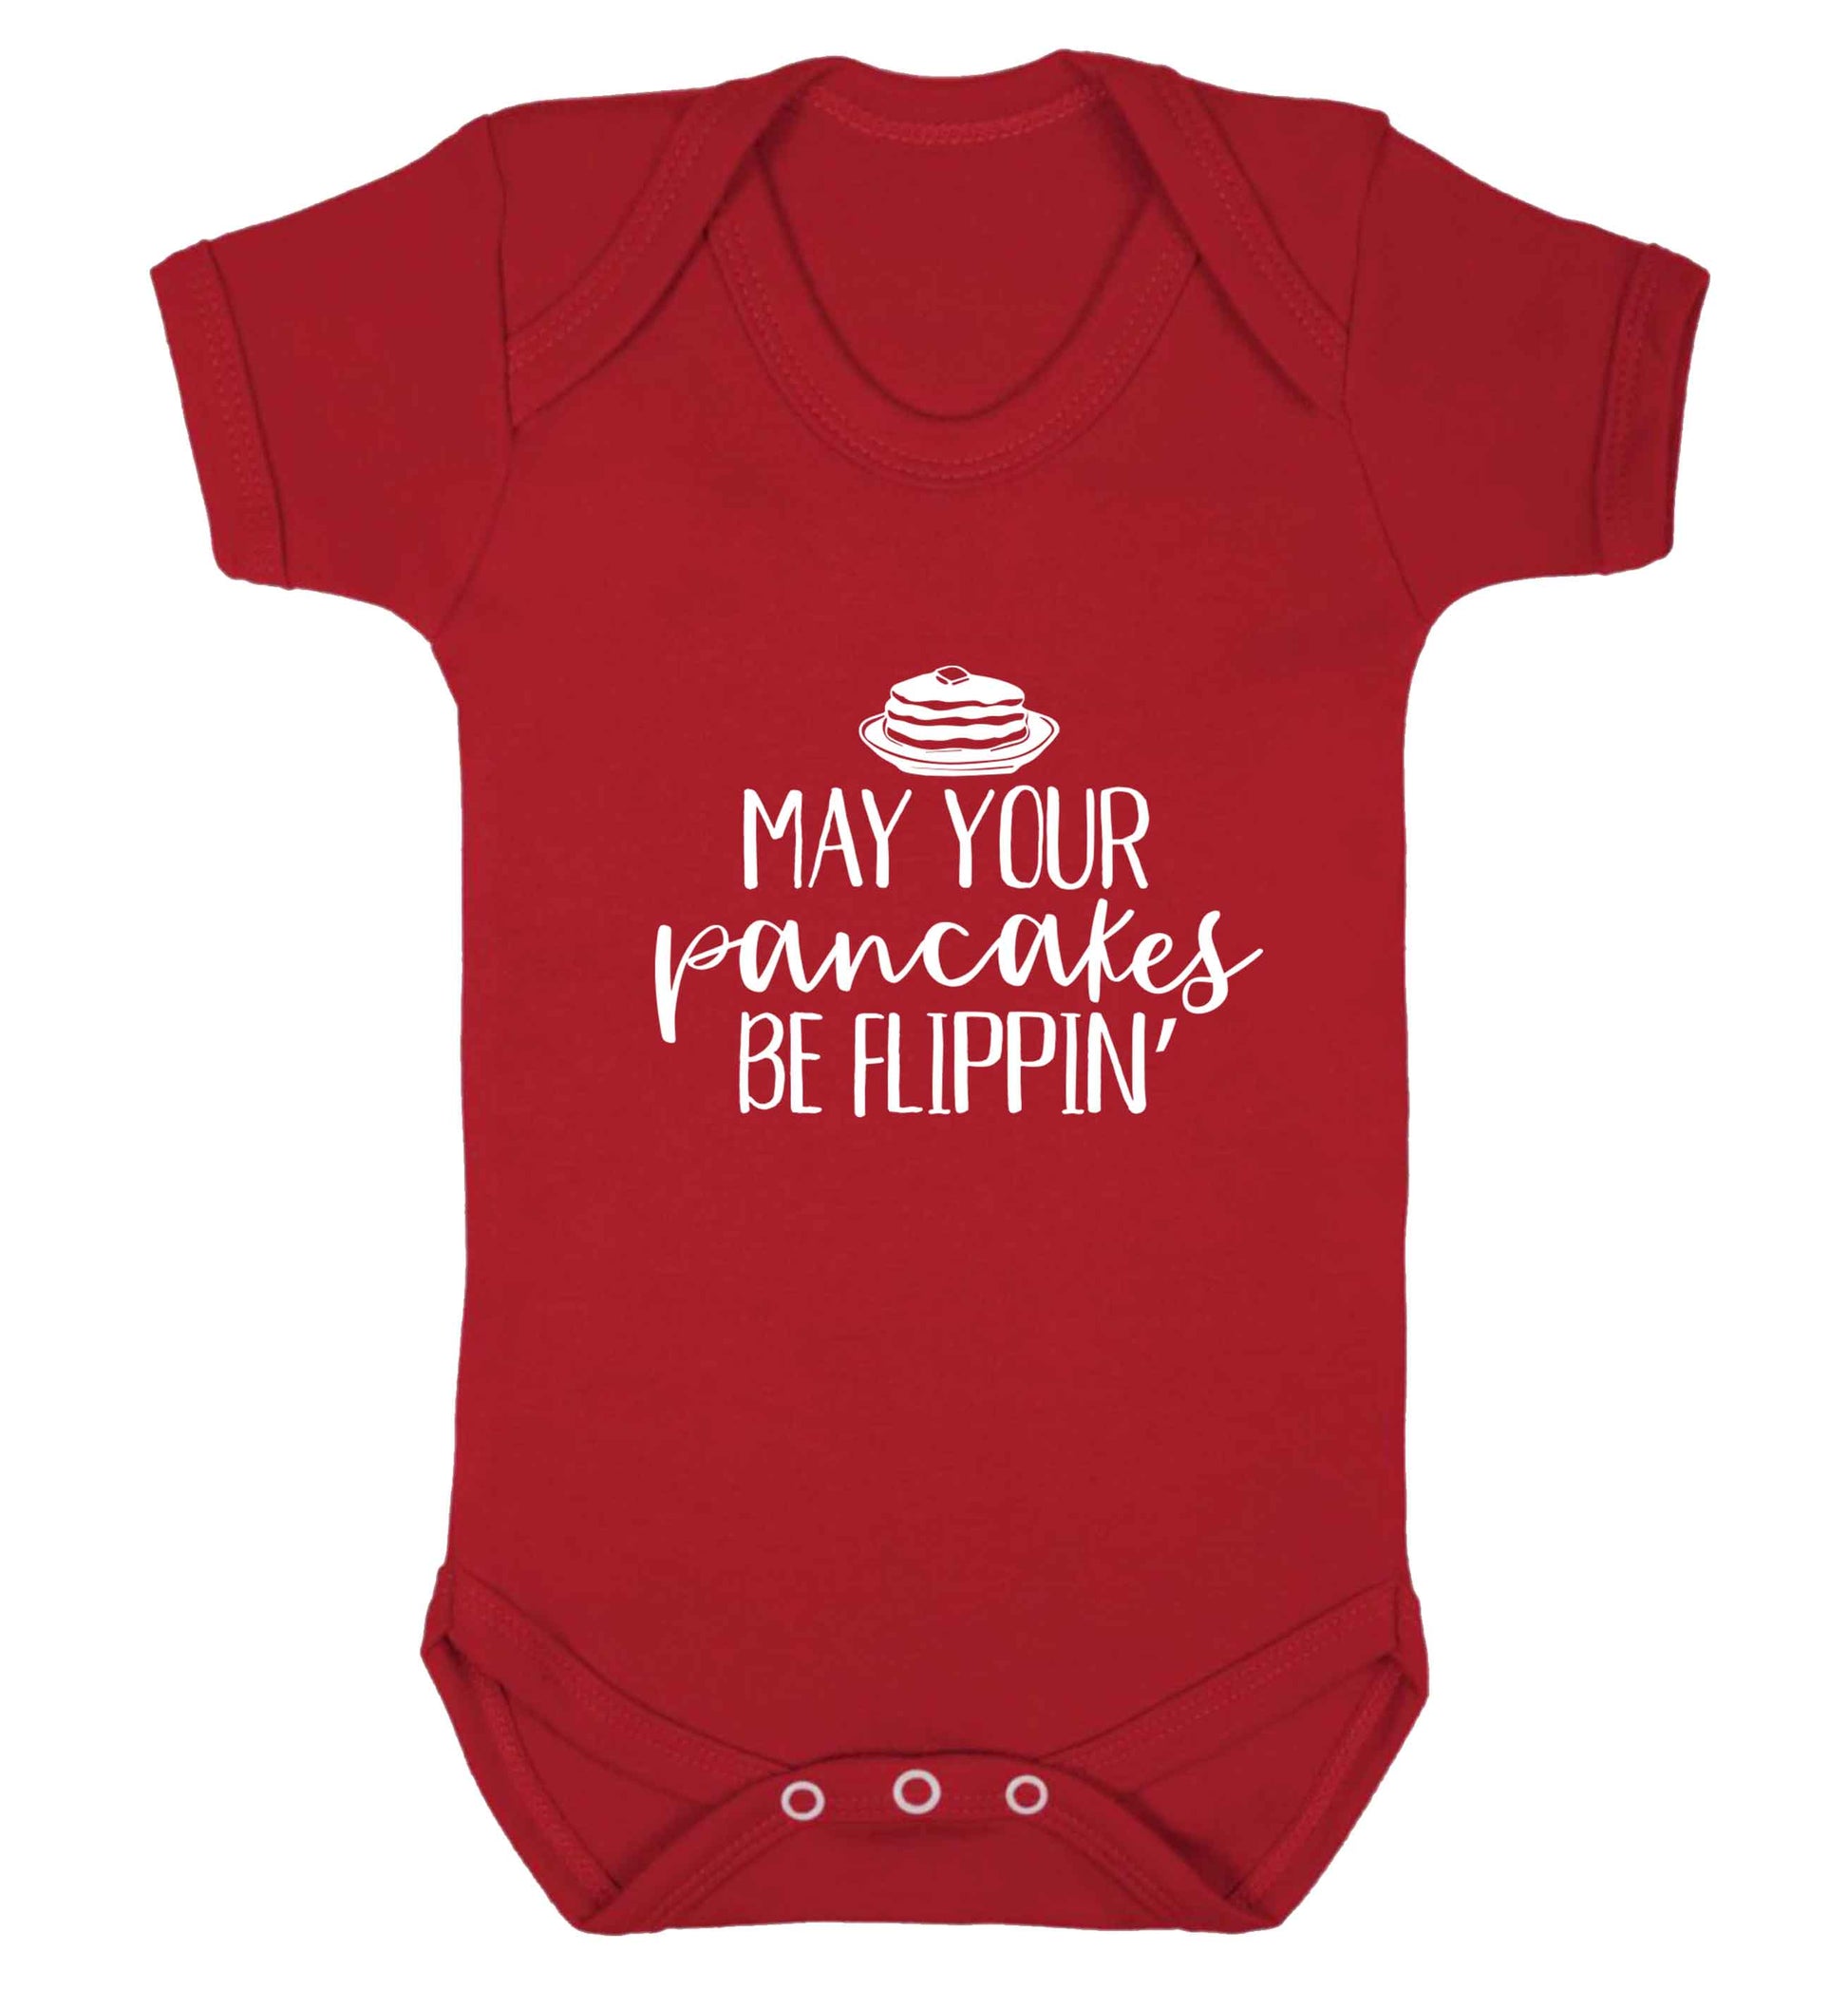 May your pancakes be flippin' baby vest red 18-24 months